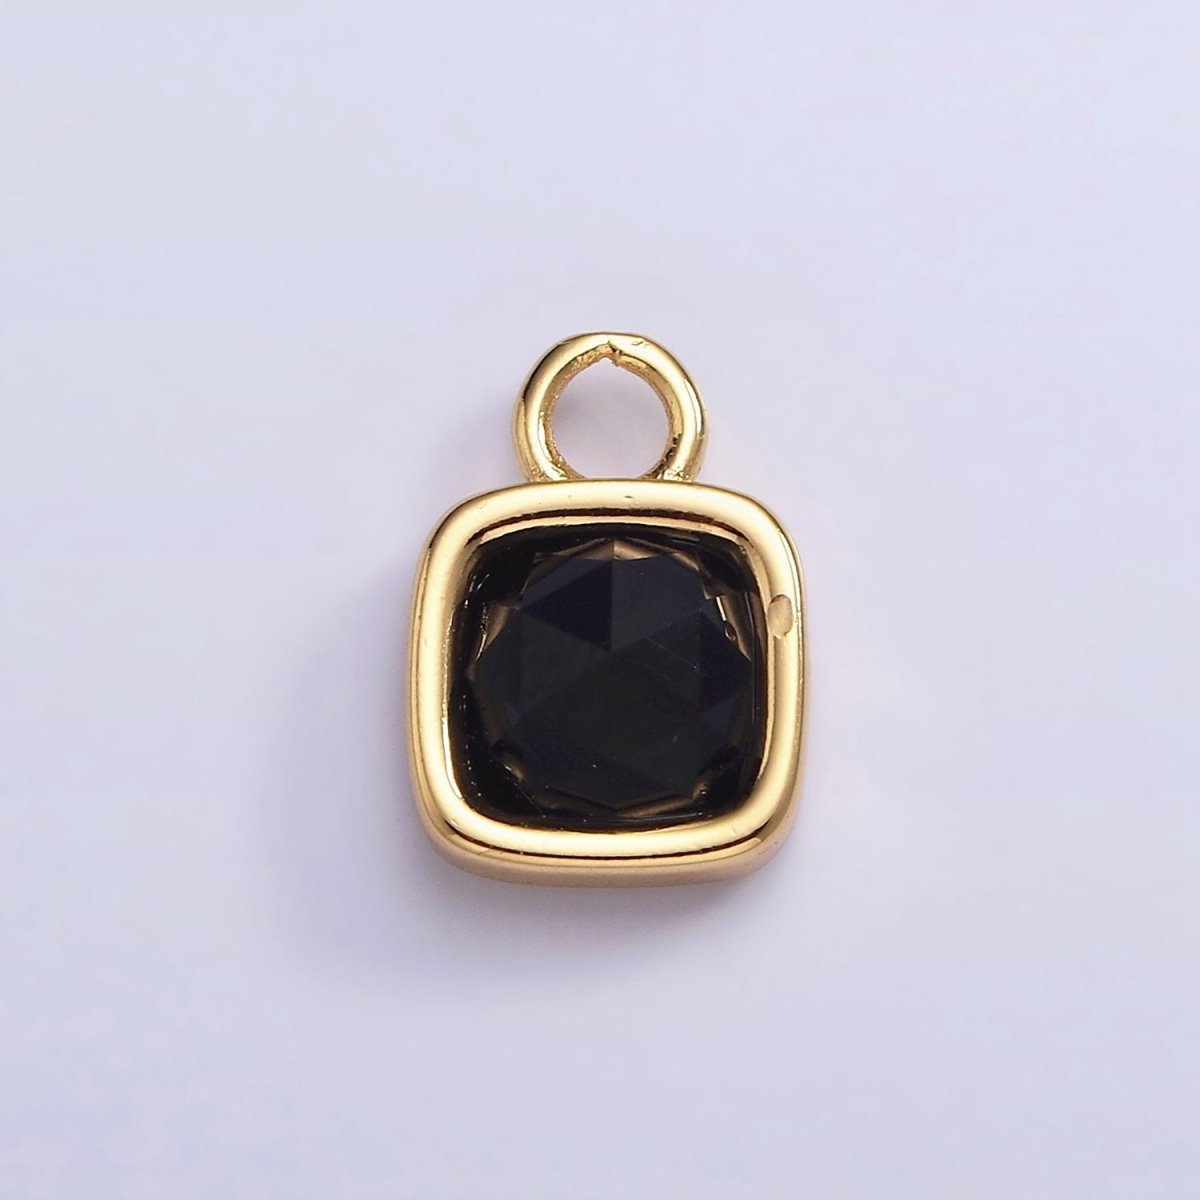 16K Gold Filled Square Multifaceted Natural Gemstone Personalized Add-On Charm | AC1466 - AC1478 - DLUXCA